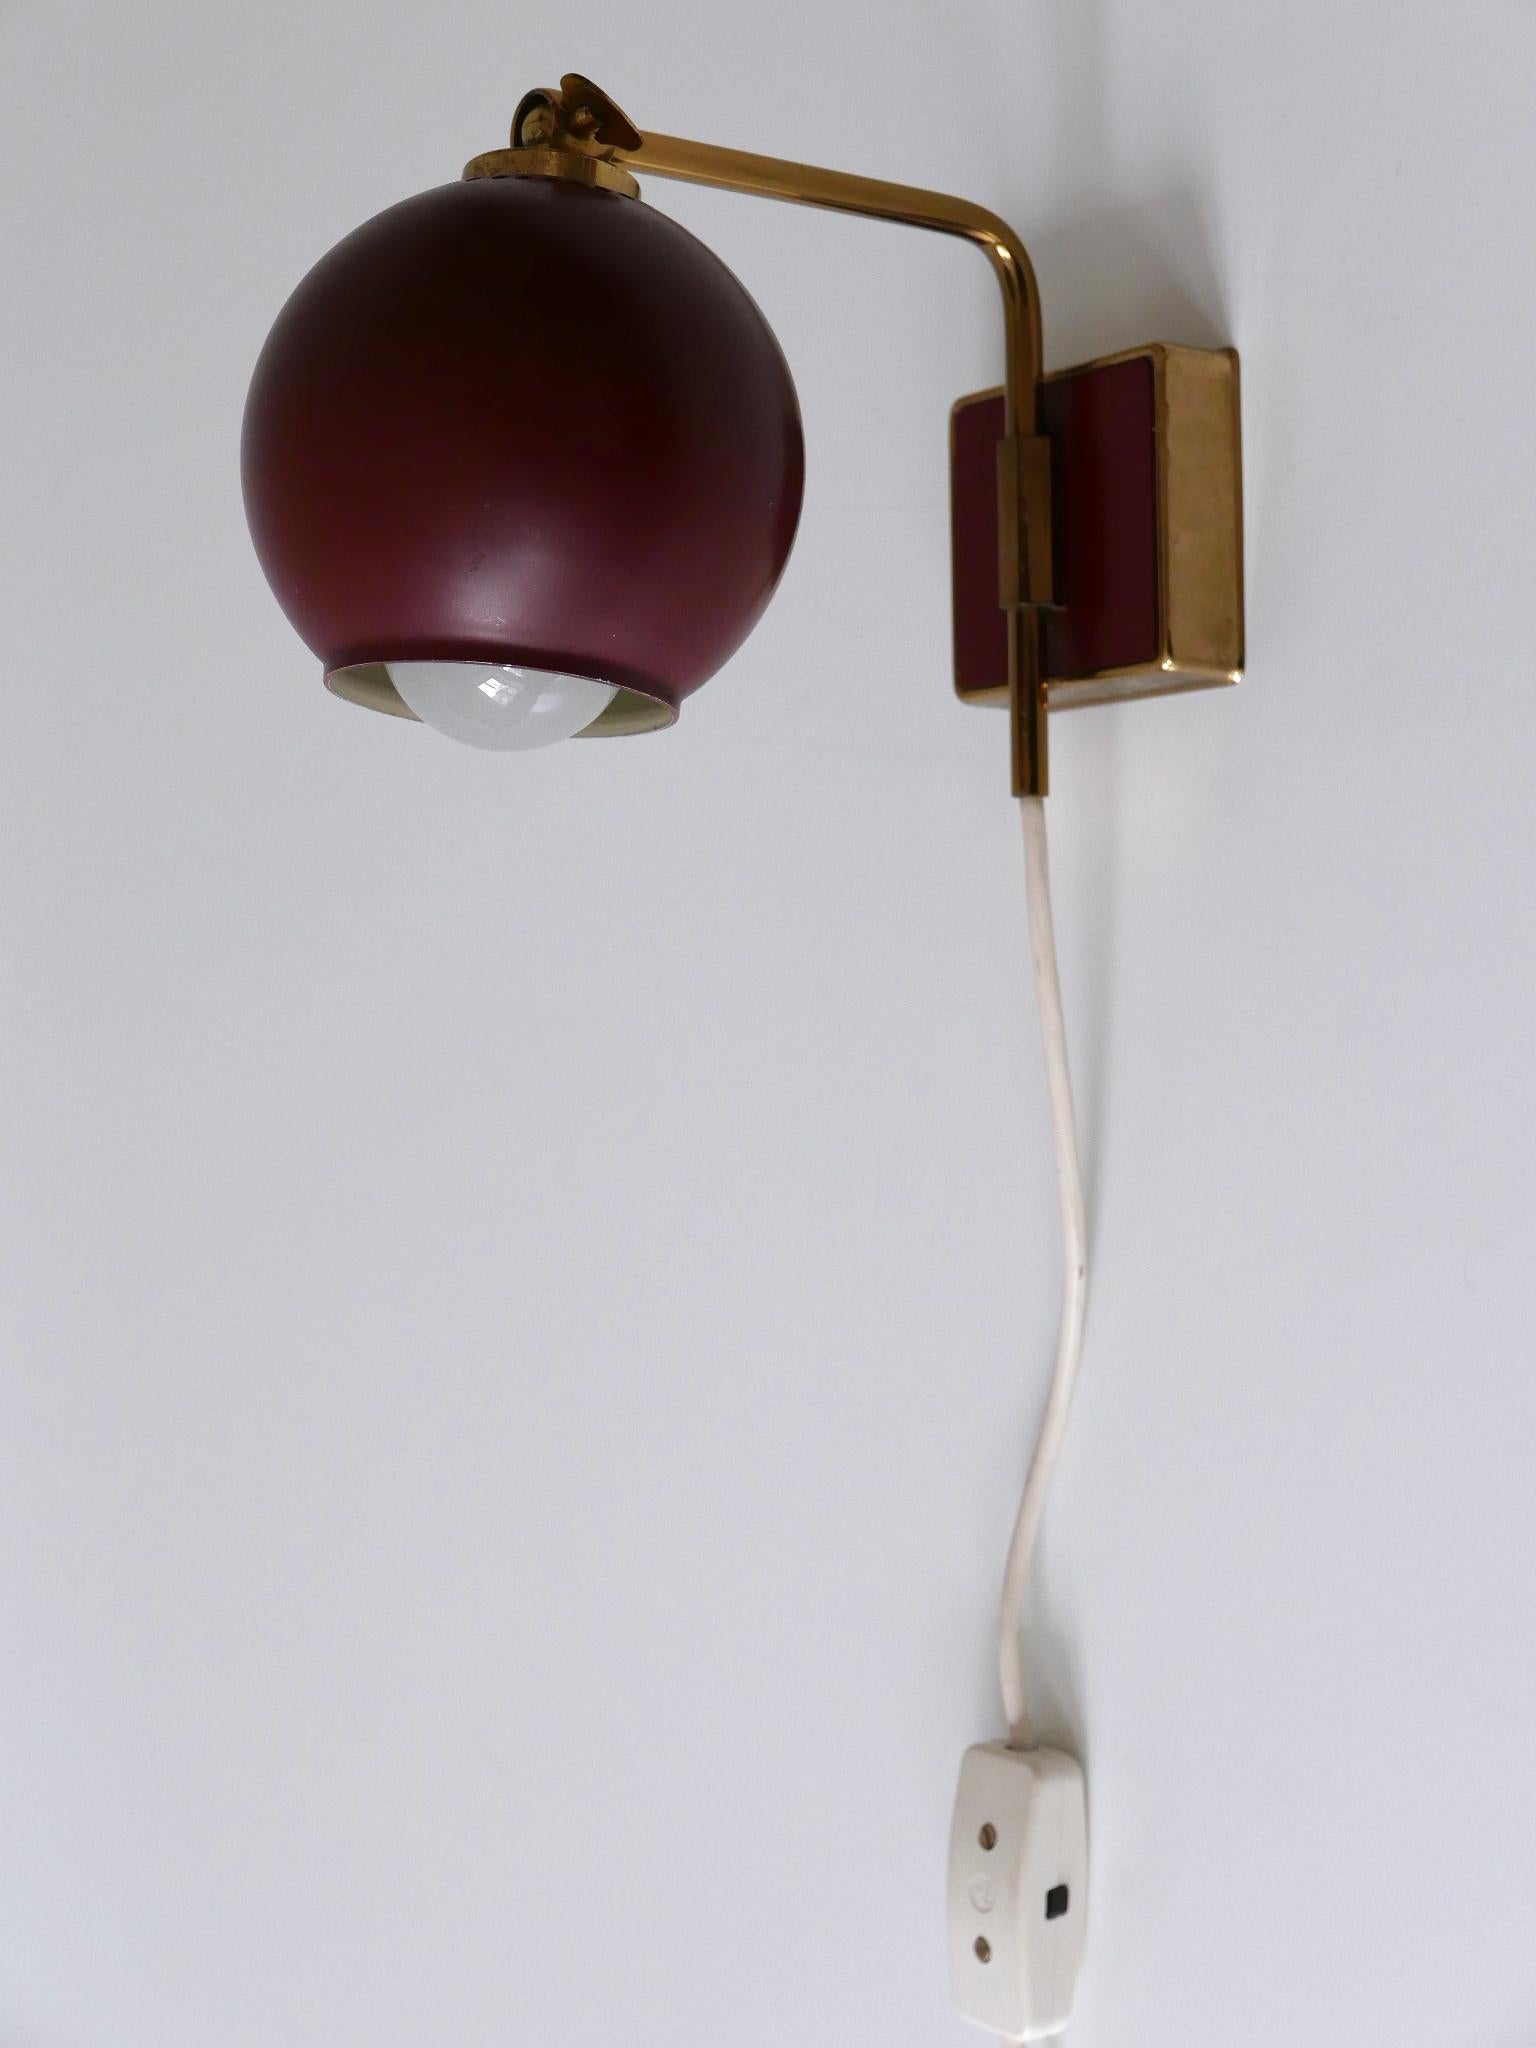 Rare and highly decorative Mid-Century Modern wall lamp or sconce. Designed & manufactured by Paul Neuhaus Leuchten, Germany, 1950s.

Executed in brass and in Bordeaux color enameled metal, the wall lamp comes with 1 x E14 / E12 Edison screw fit